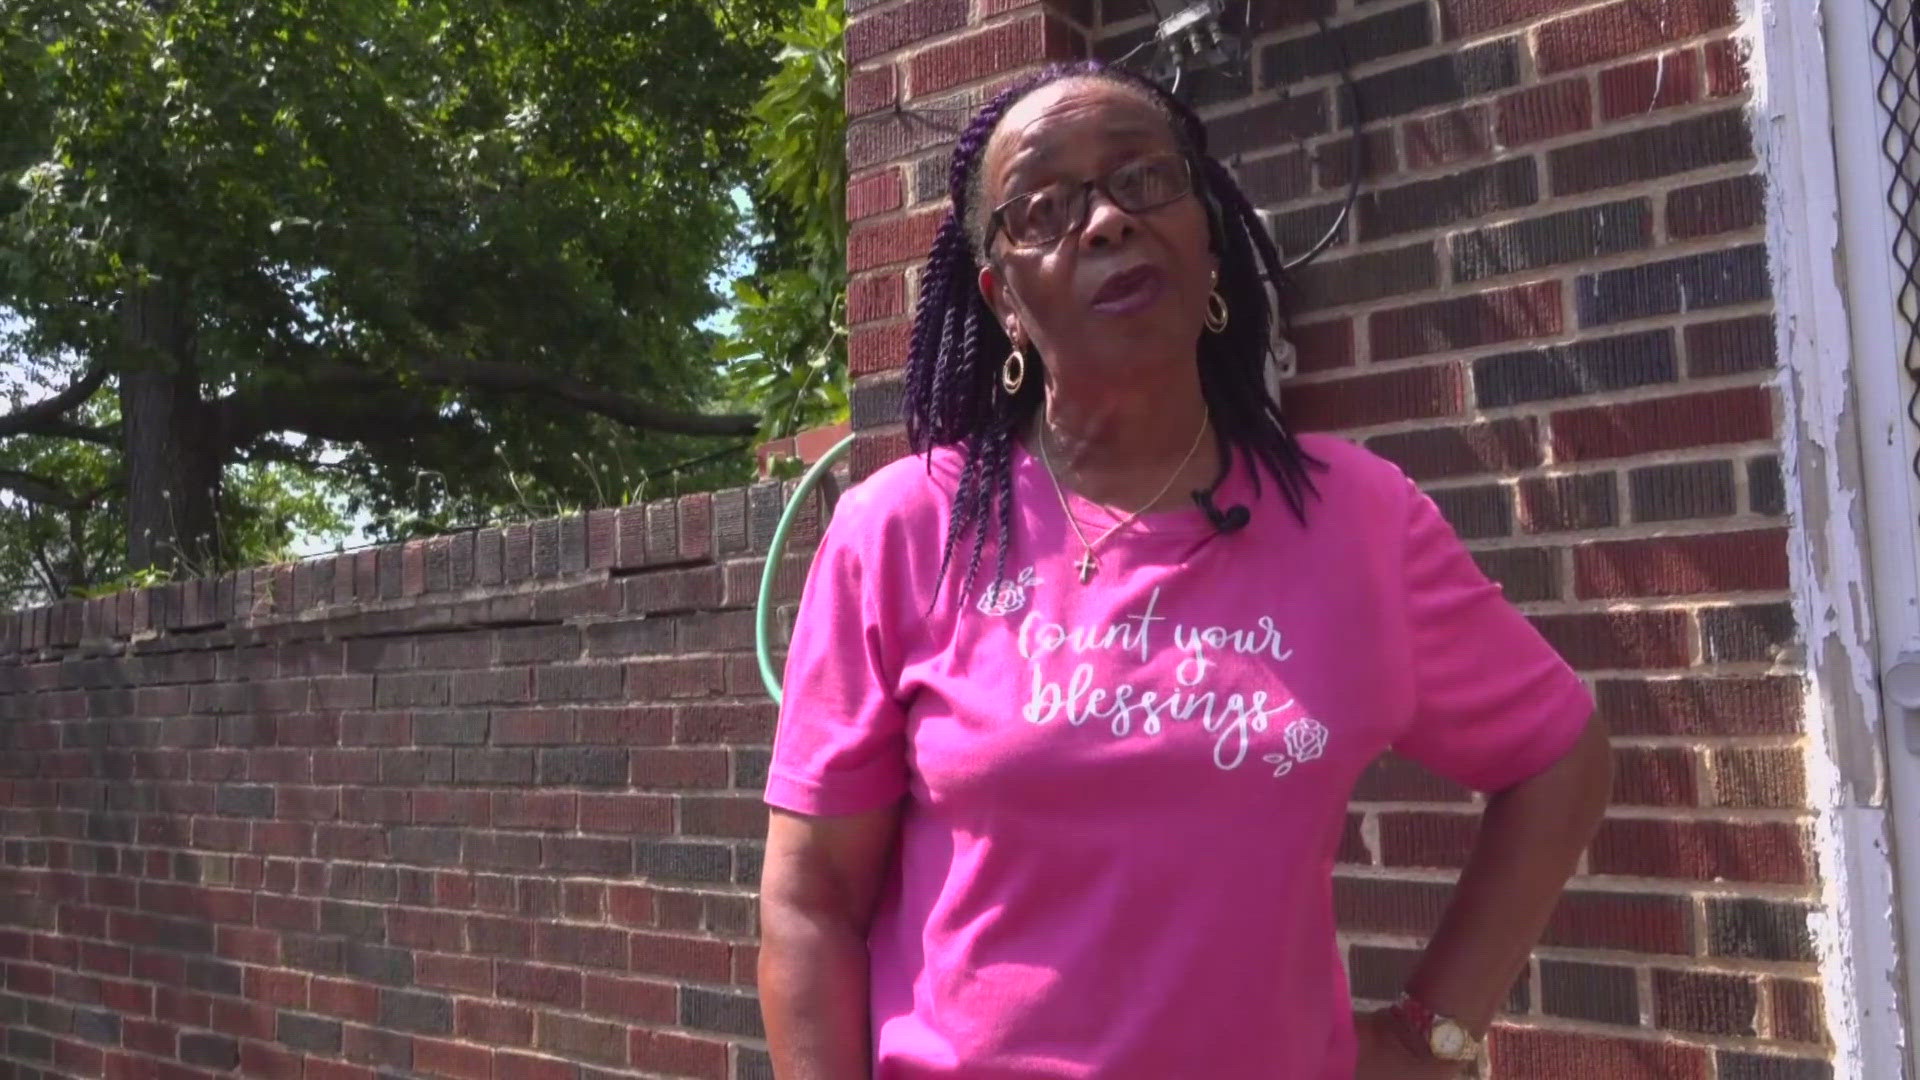 Gloria Matthews claims roots are destroying her home, but city agencies say root damage from a neighboring tree is a property owner’s problem.